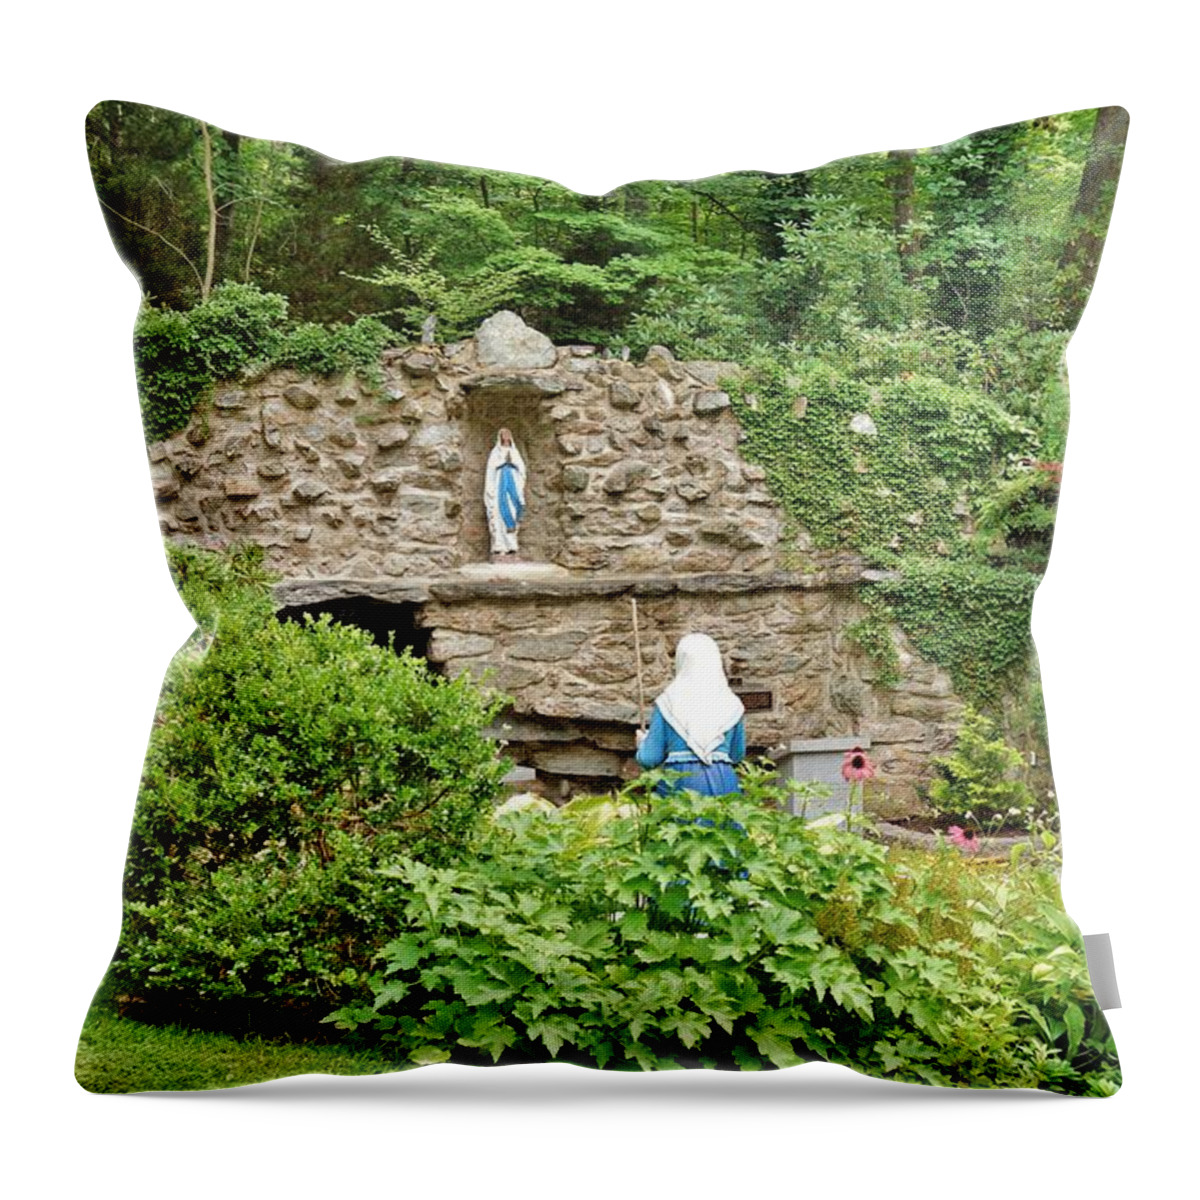 National Shrine Grotto Of Our Lady Of Lourdes Throw Pillow featuring the photograph National Shrine Grotto of Our Lady of Lourdes by Jean Goodwin Brooks